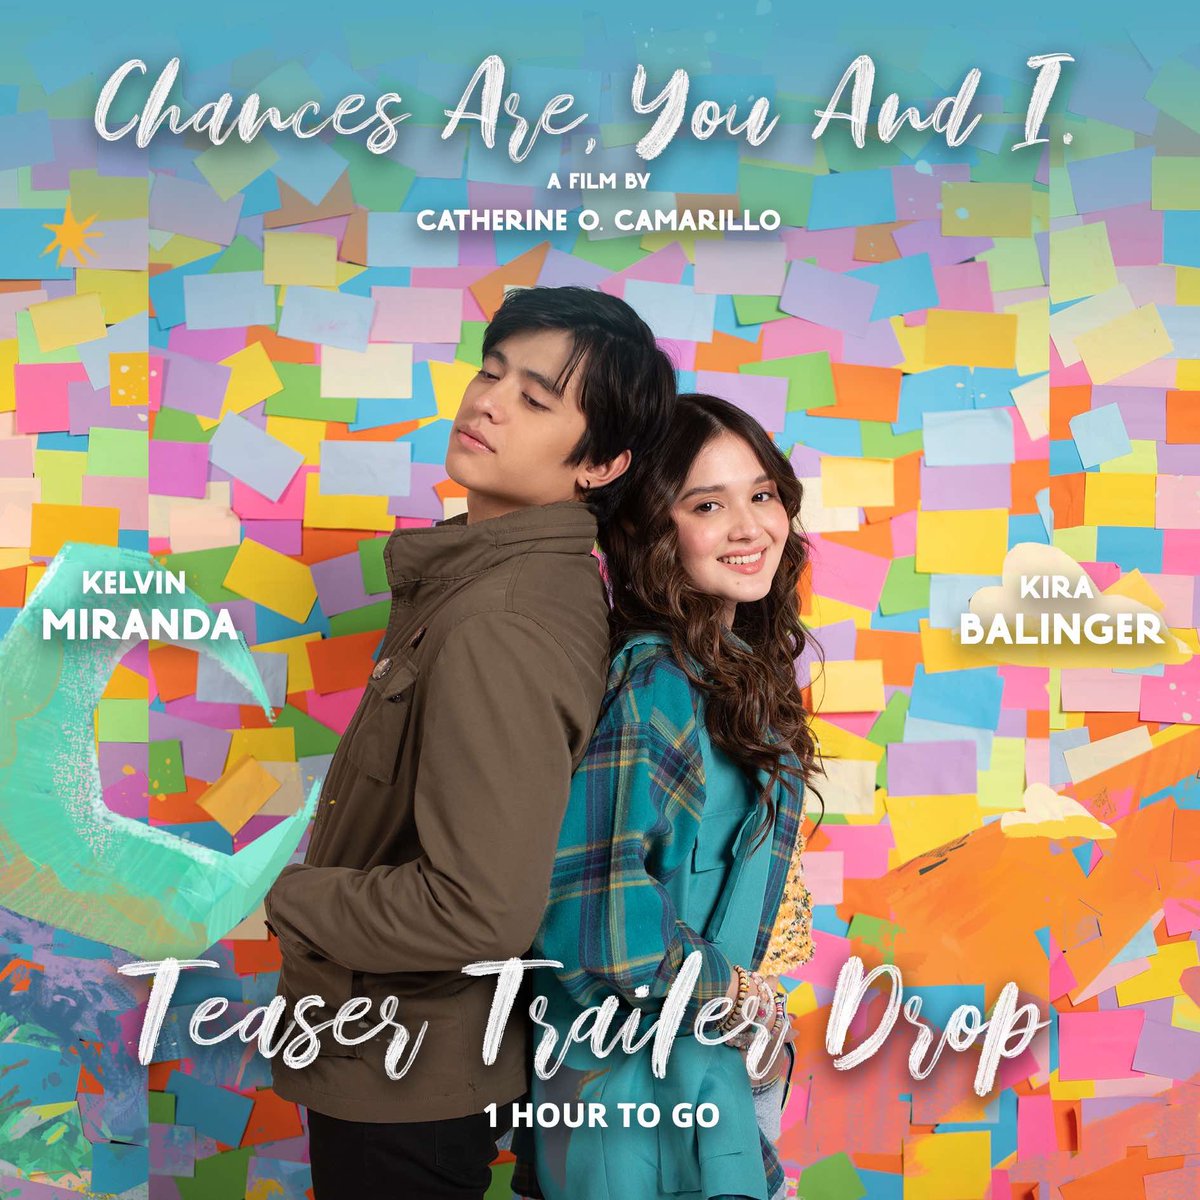 What a way to start the new month ✨ Get ready for the teaser of the movie ‘Chances Are, You and I’ starring Kelvin Miranda and Kira Balinger ❤️ Dropping tonight at 7PM! 🎥 

#KelvinMiranda #ChancesAreYouAndI #CHAYIAnghel #CHAYIDemonyo #HeadsOrTails